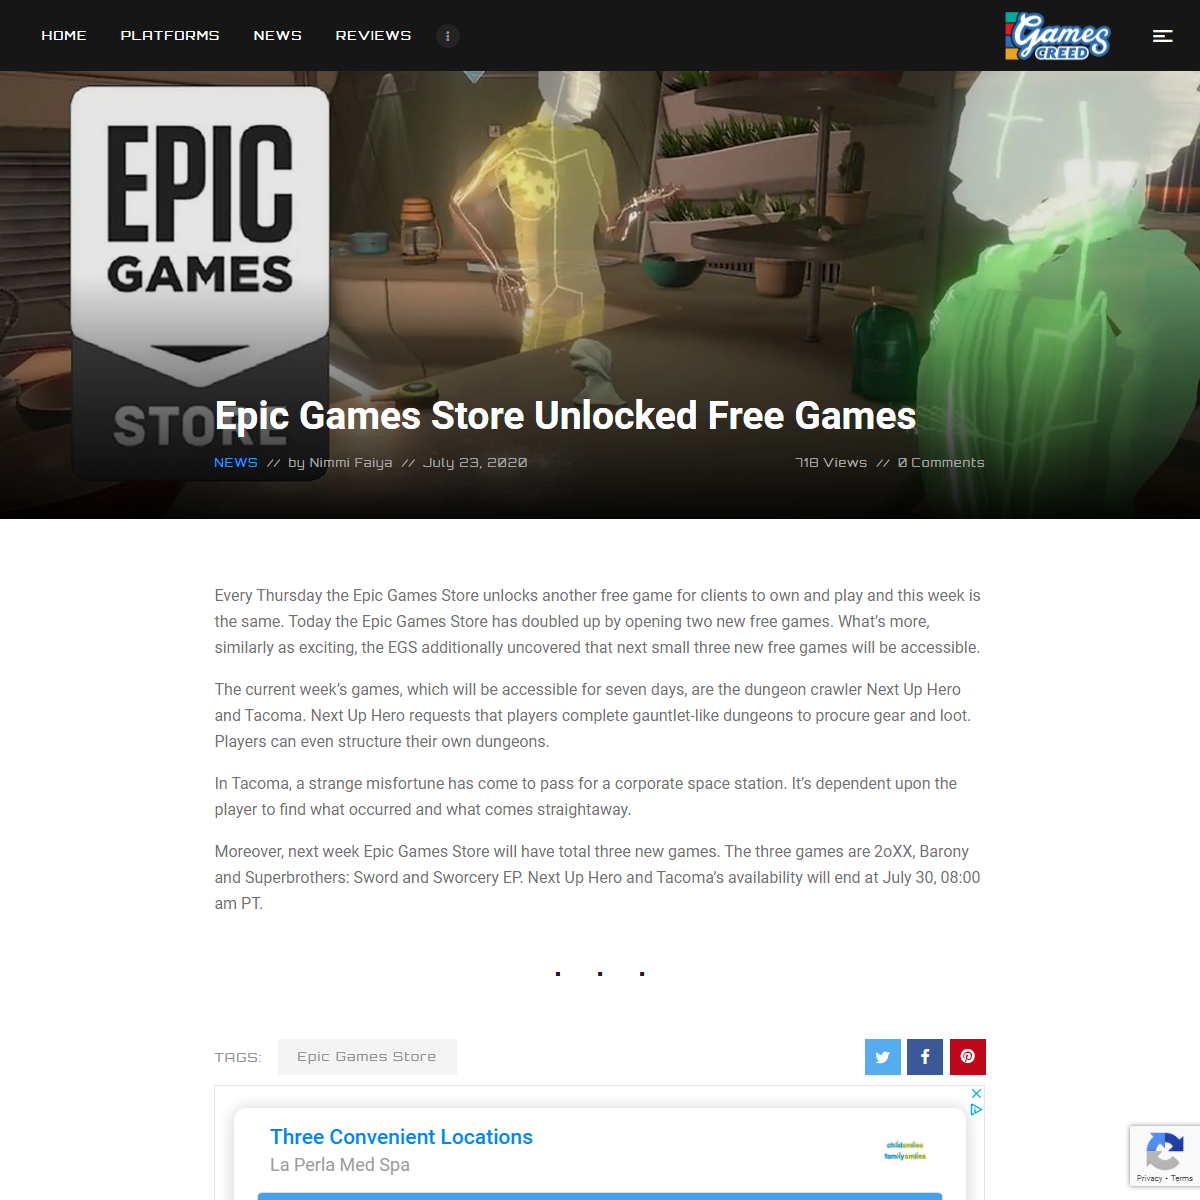 A complete backup of https://www.gamescreed.com/news/epic-games-store-unlocked-free-games/